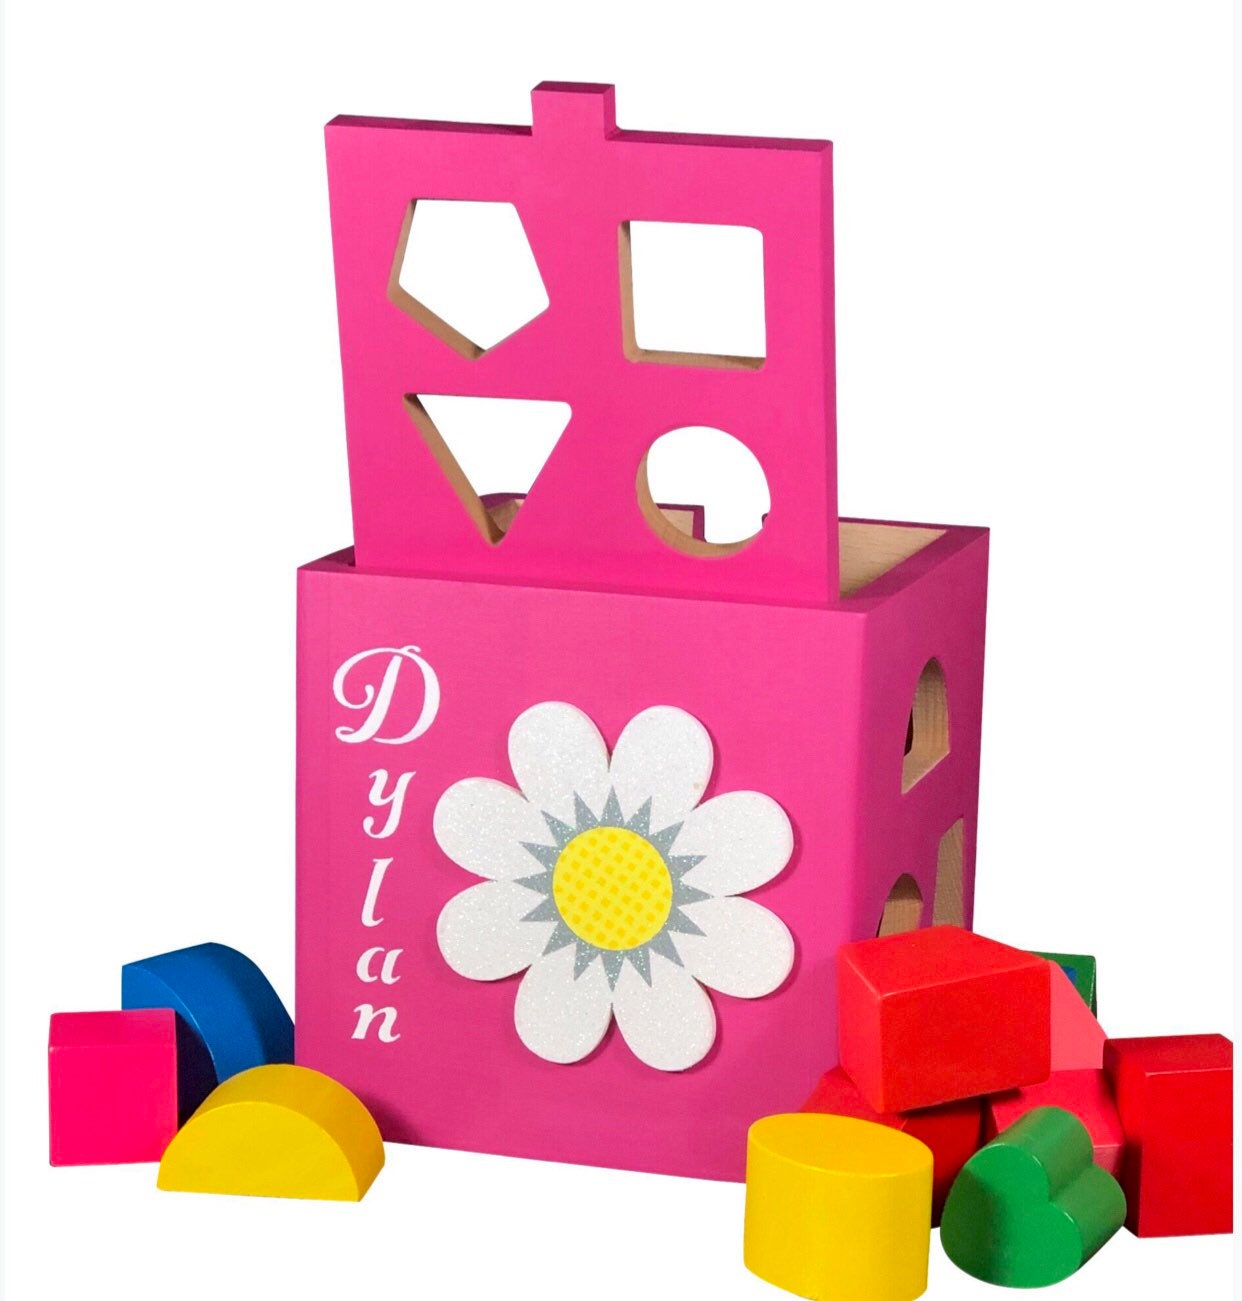 Montessori toys for 1 year old